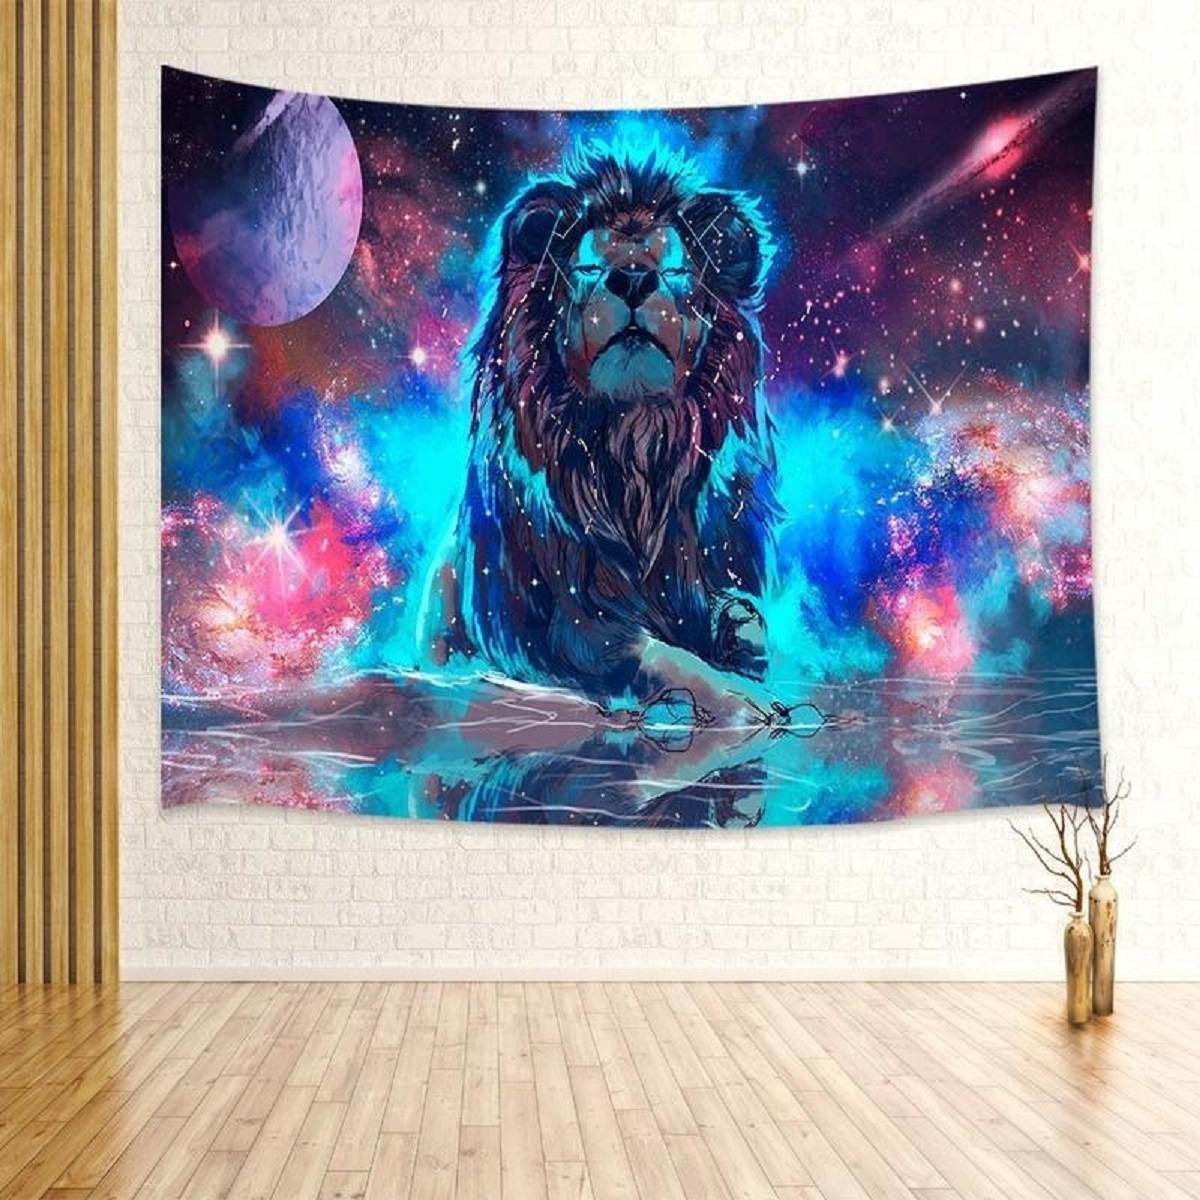 3D Psychedelic Lion Wall Hanging Tapestry Colorful Painting Hanging Tapestries Wall Curtain Wall Carpet Blanket Home Decor